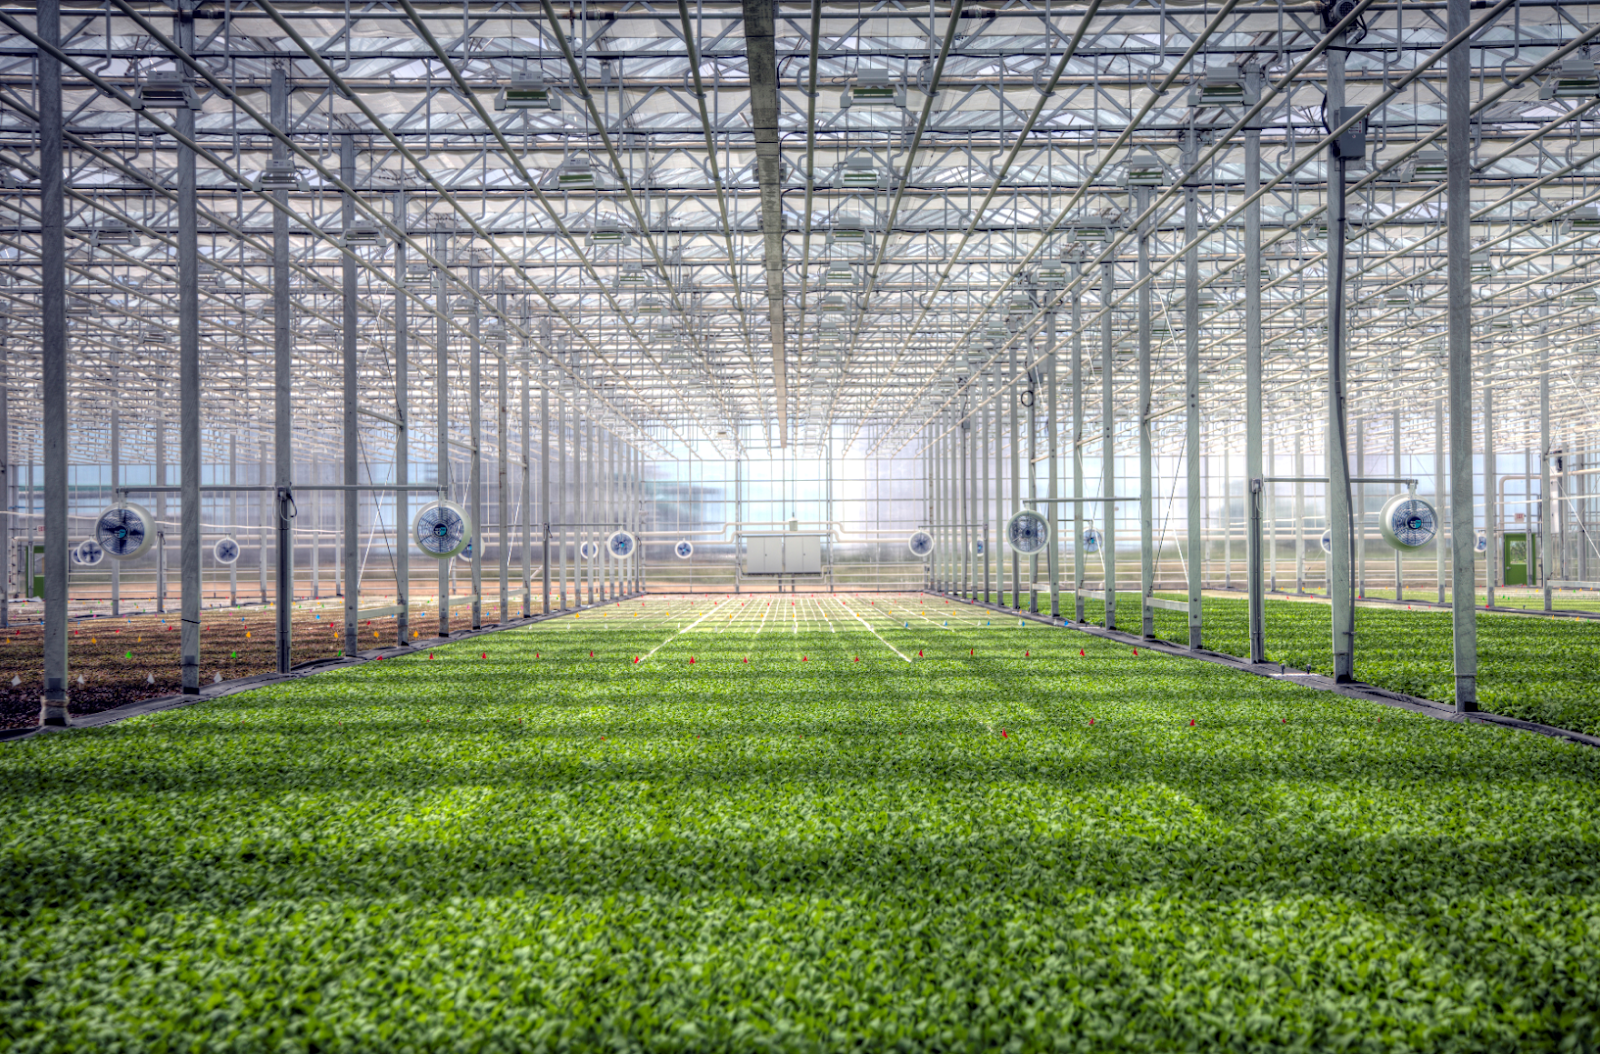 Rendering of a BrightFarms greenhouse. Salad greens grow on floating rafts in a hydroponic system. | Source: BrightFarms